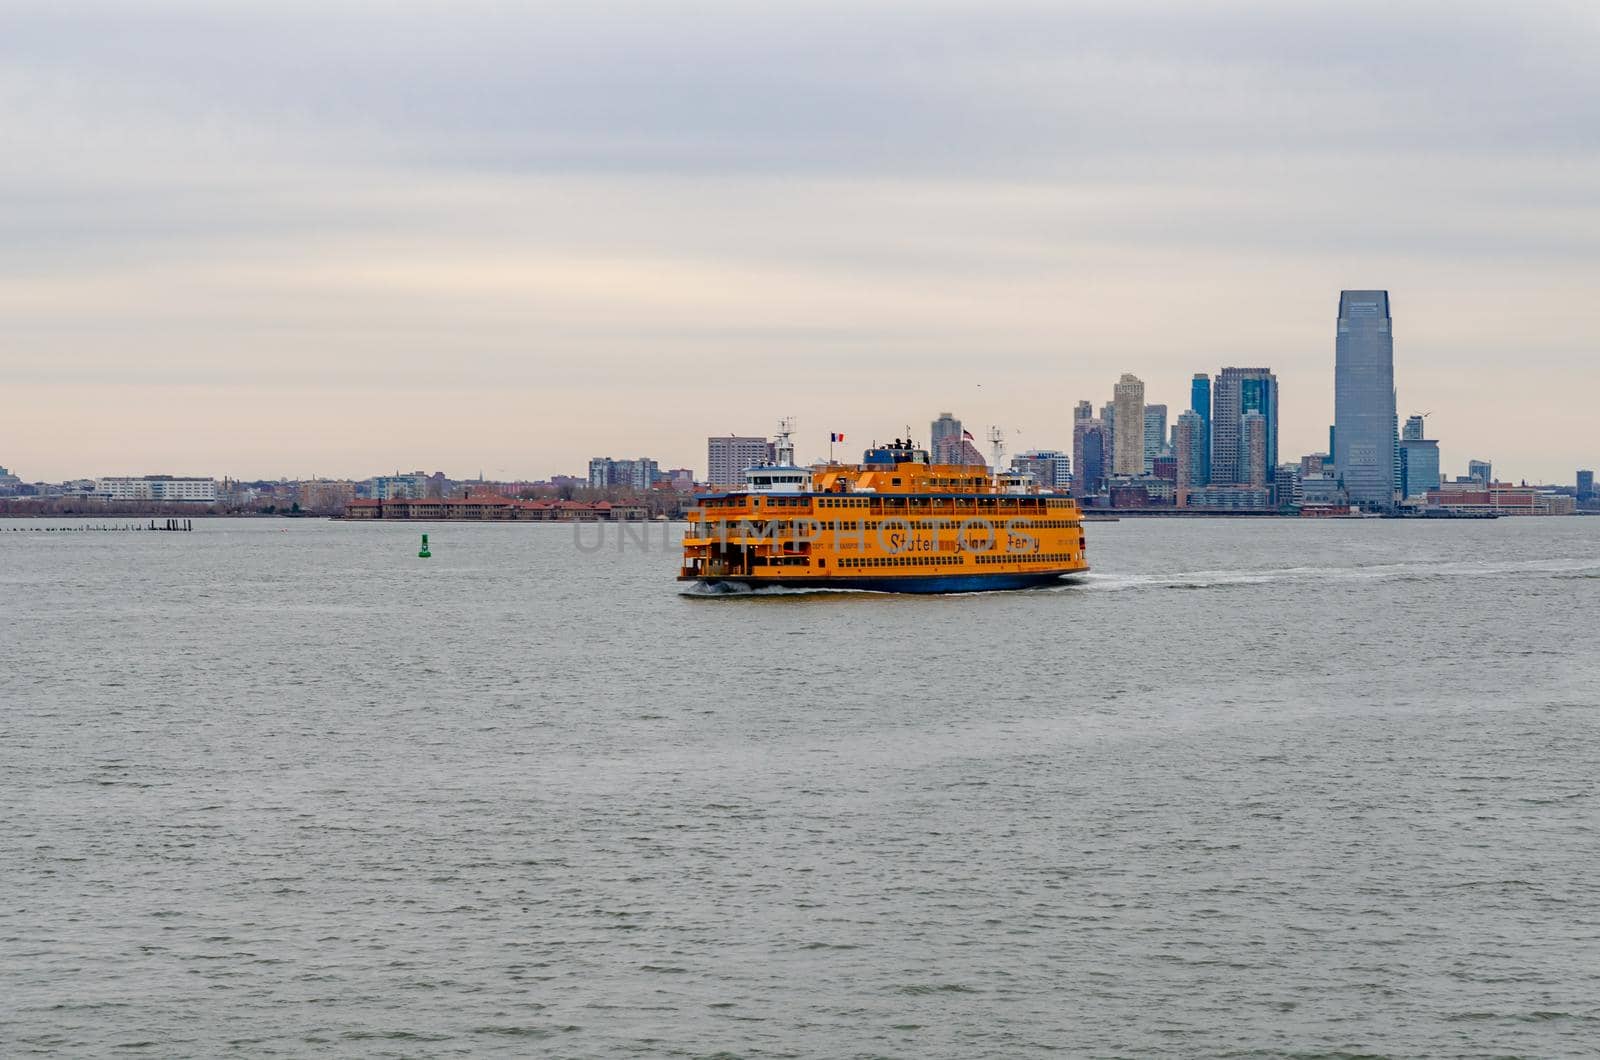 Yellow Staten Island Ferry on Hudson river in front of Jersey City, New York by bildgigant